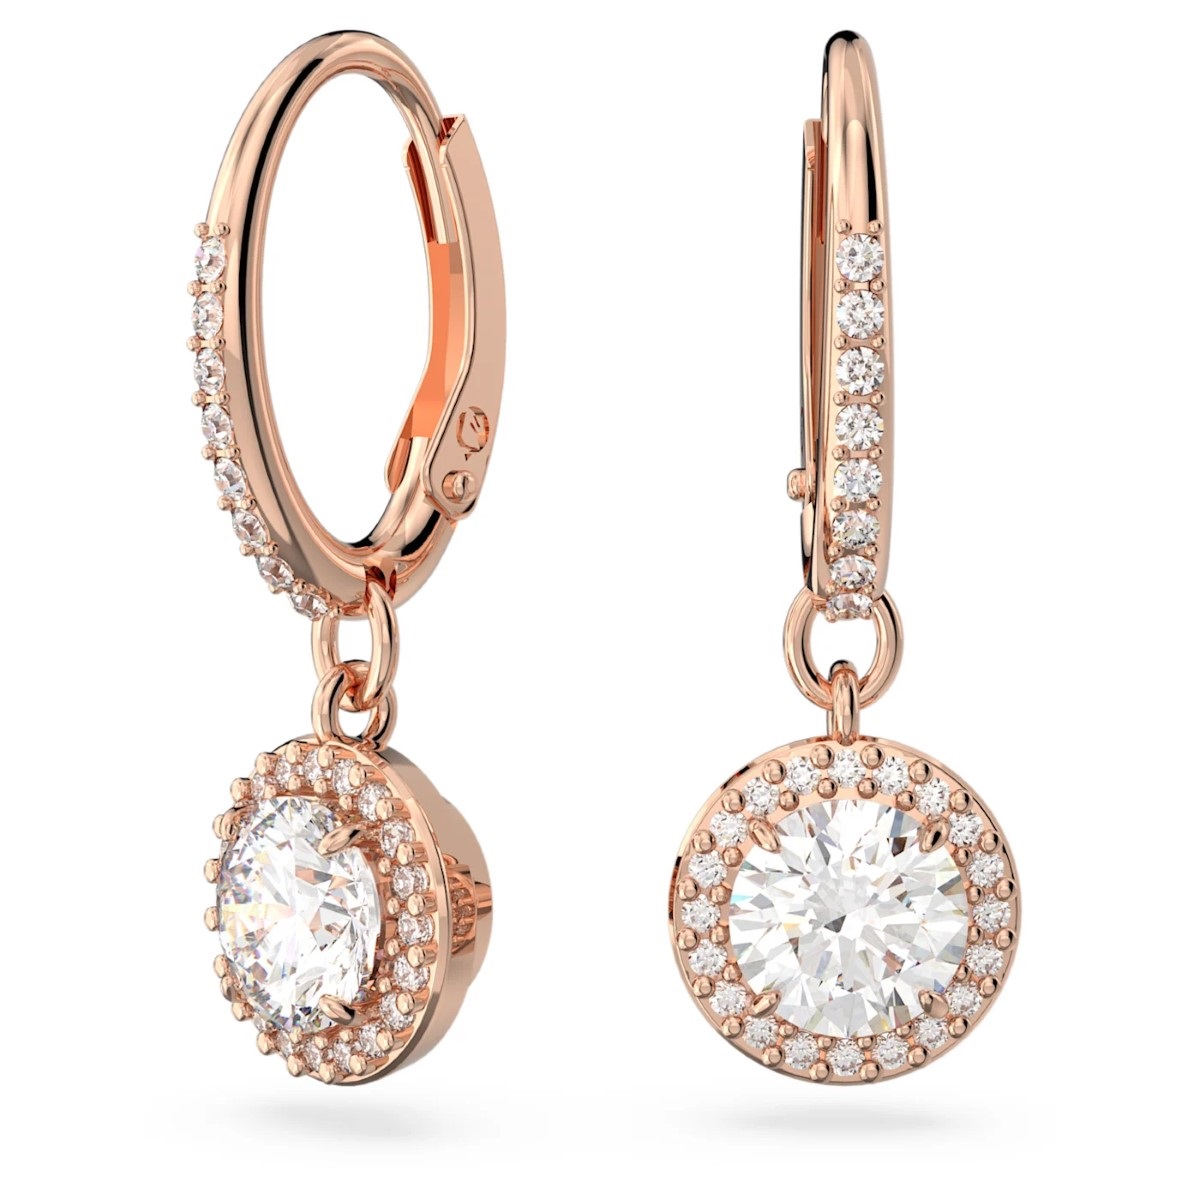 Swarovski Constella Drop Earrings - White with Rose Gold Plating 5638769